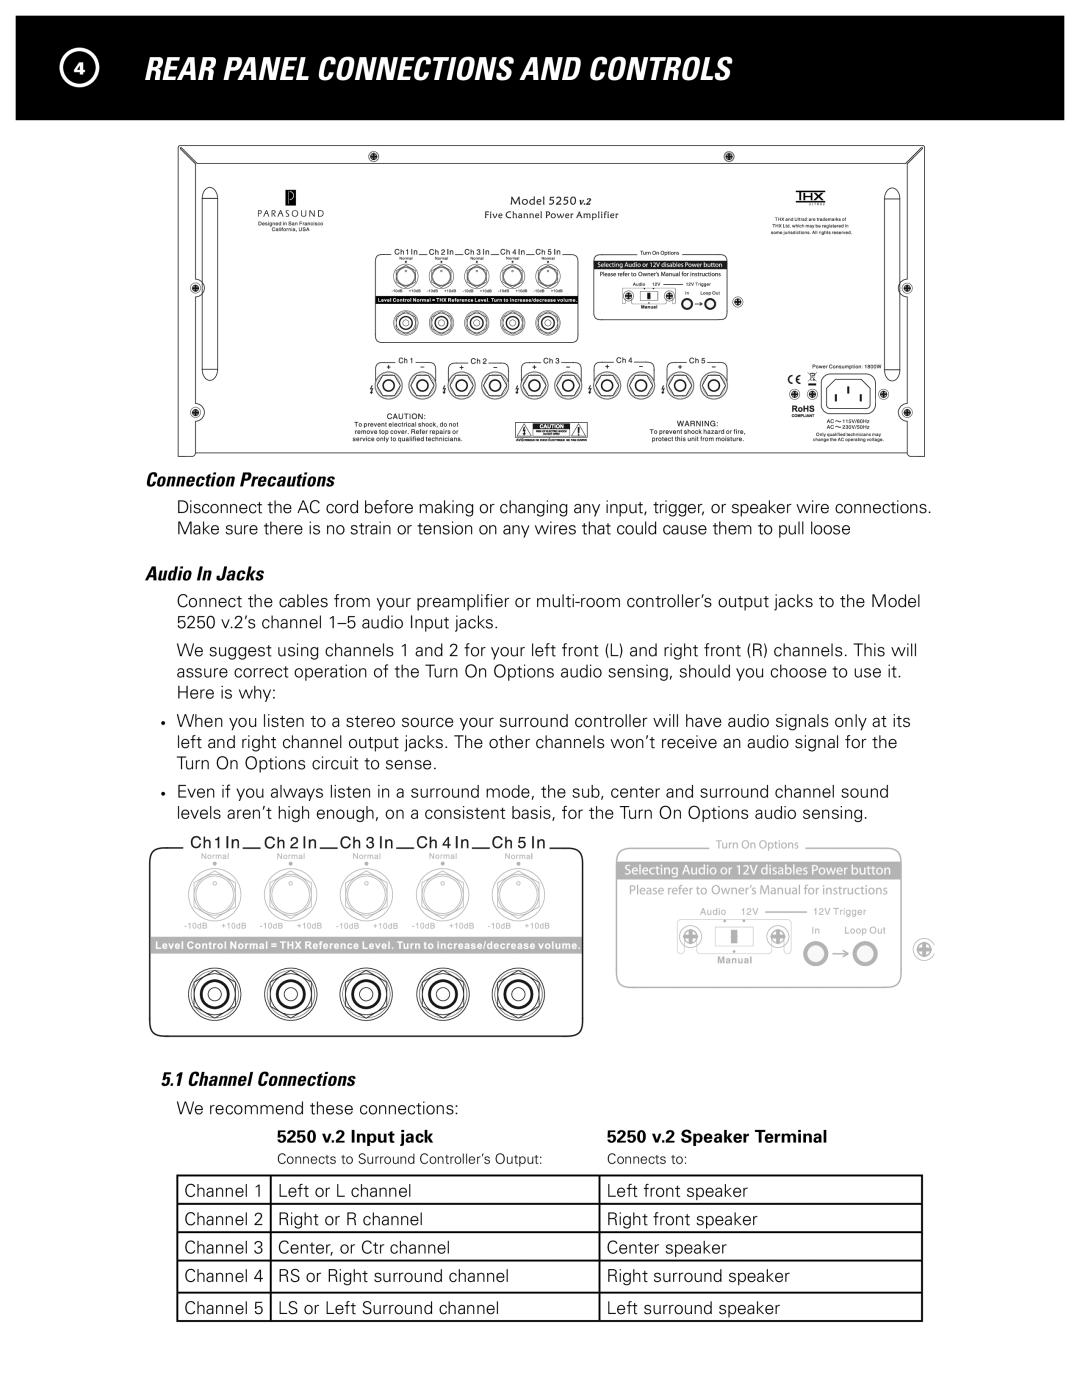 Parasound 5250 V.2 manual 4Rear Panel Connections and Controls, Connection Precautions, Audio In Jacks, Channel Connections 